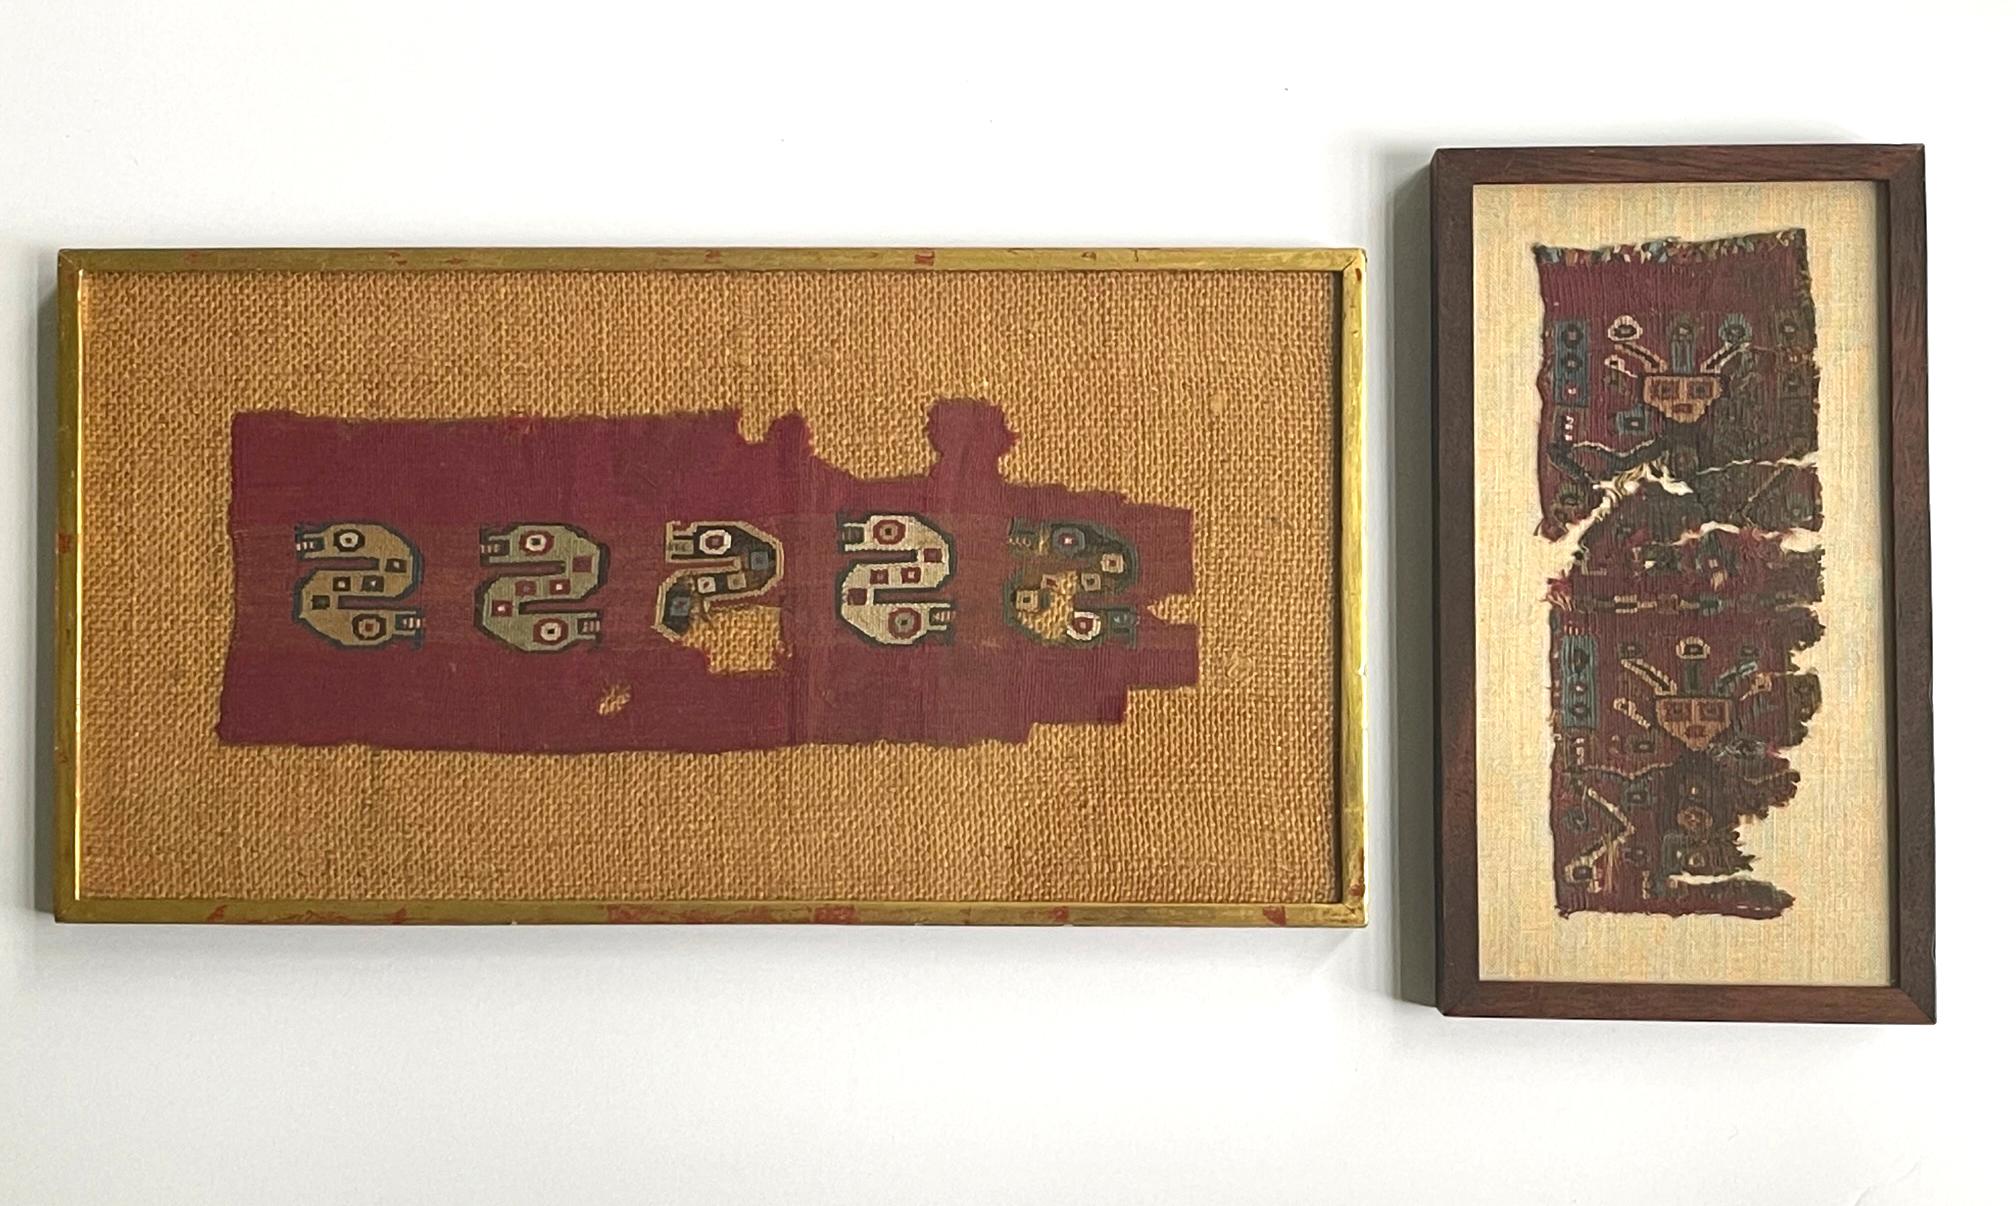 Two framed pre-Columbian textile fragments from Chancay culture (1000AD-1470AD) in nowadays Peru. Both panels are of a similar red background and possibly woven from camelid fibers. One features two vertical anthropomorphic feline figures, an iconic